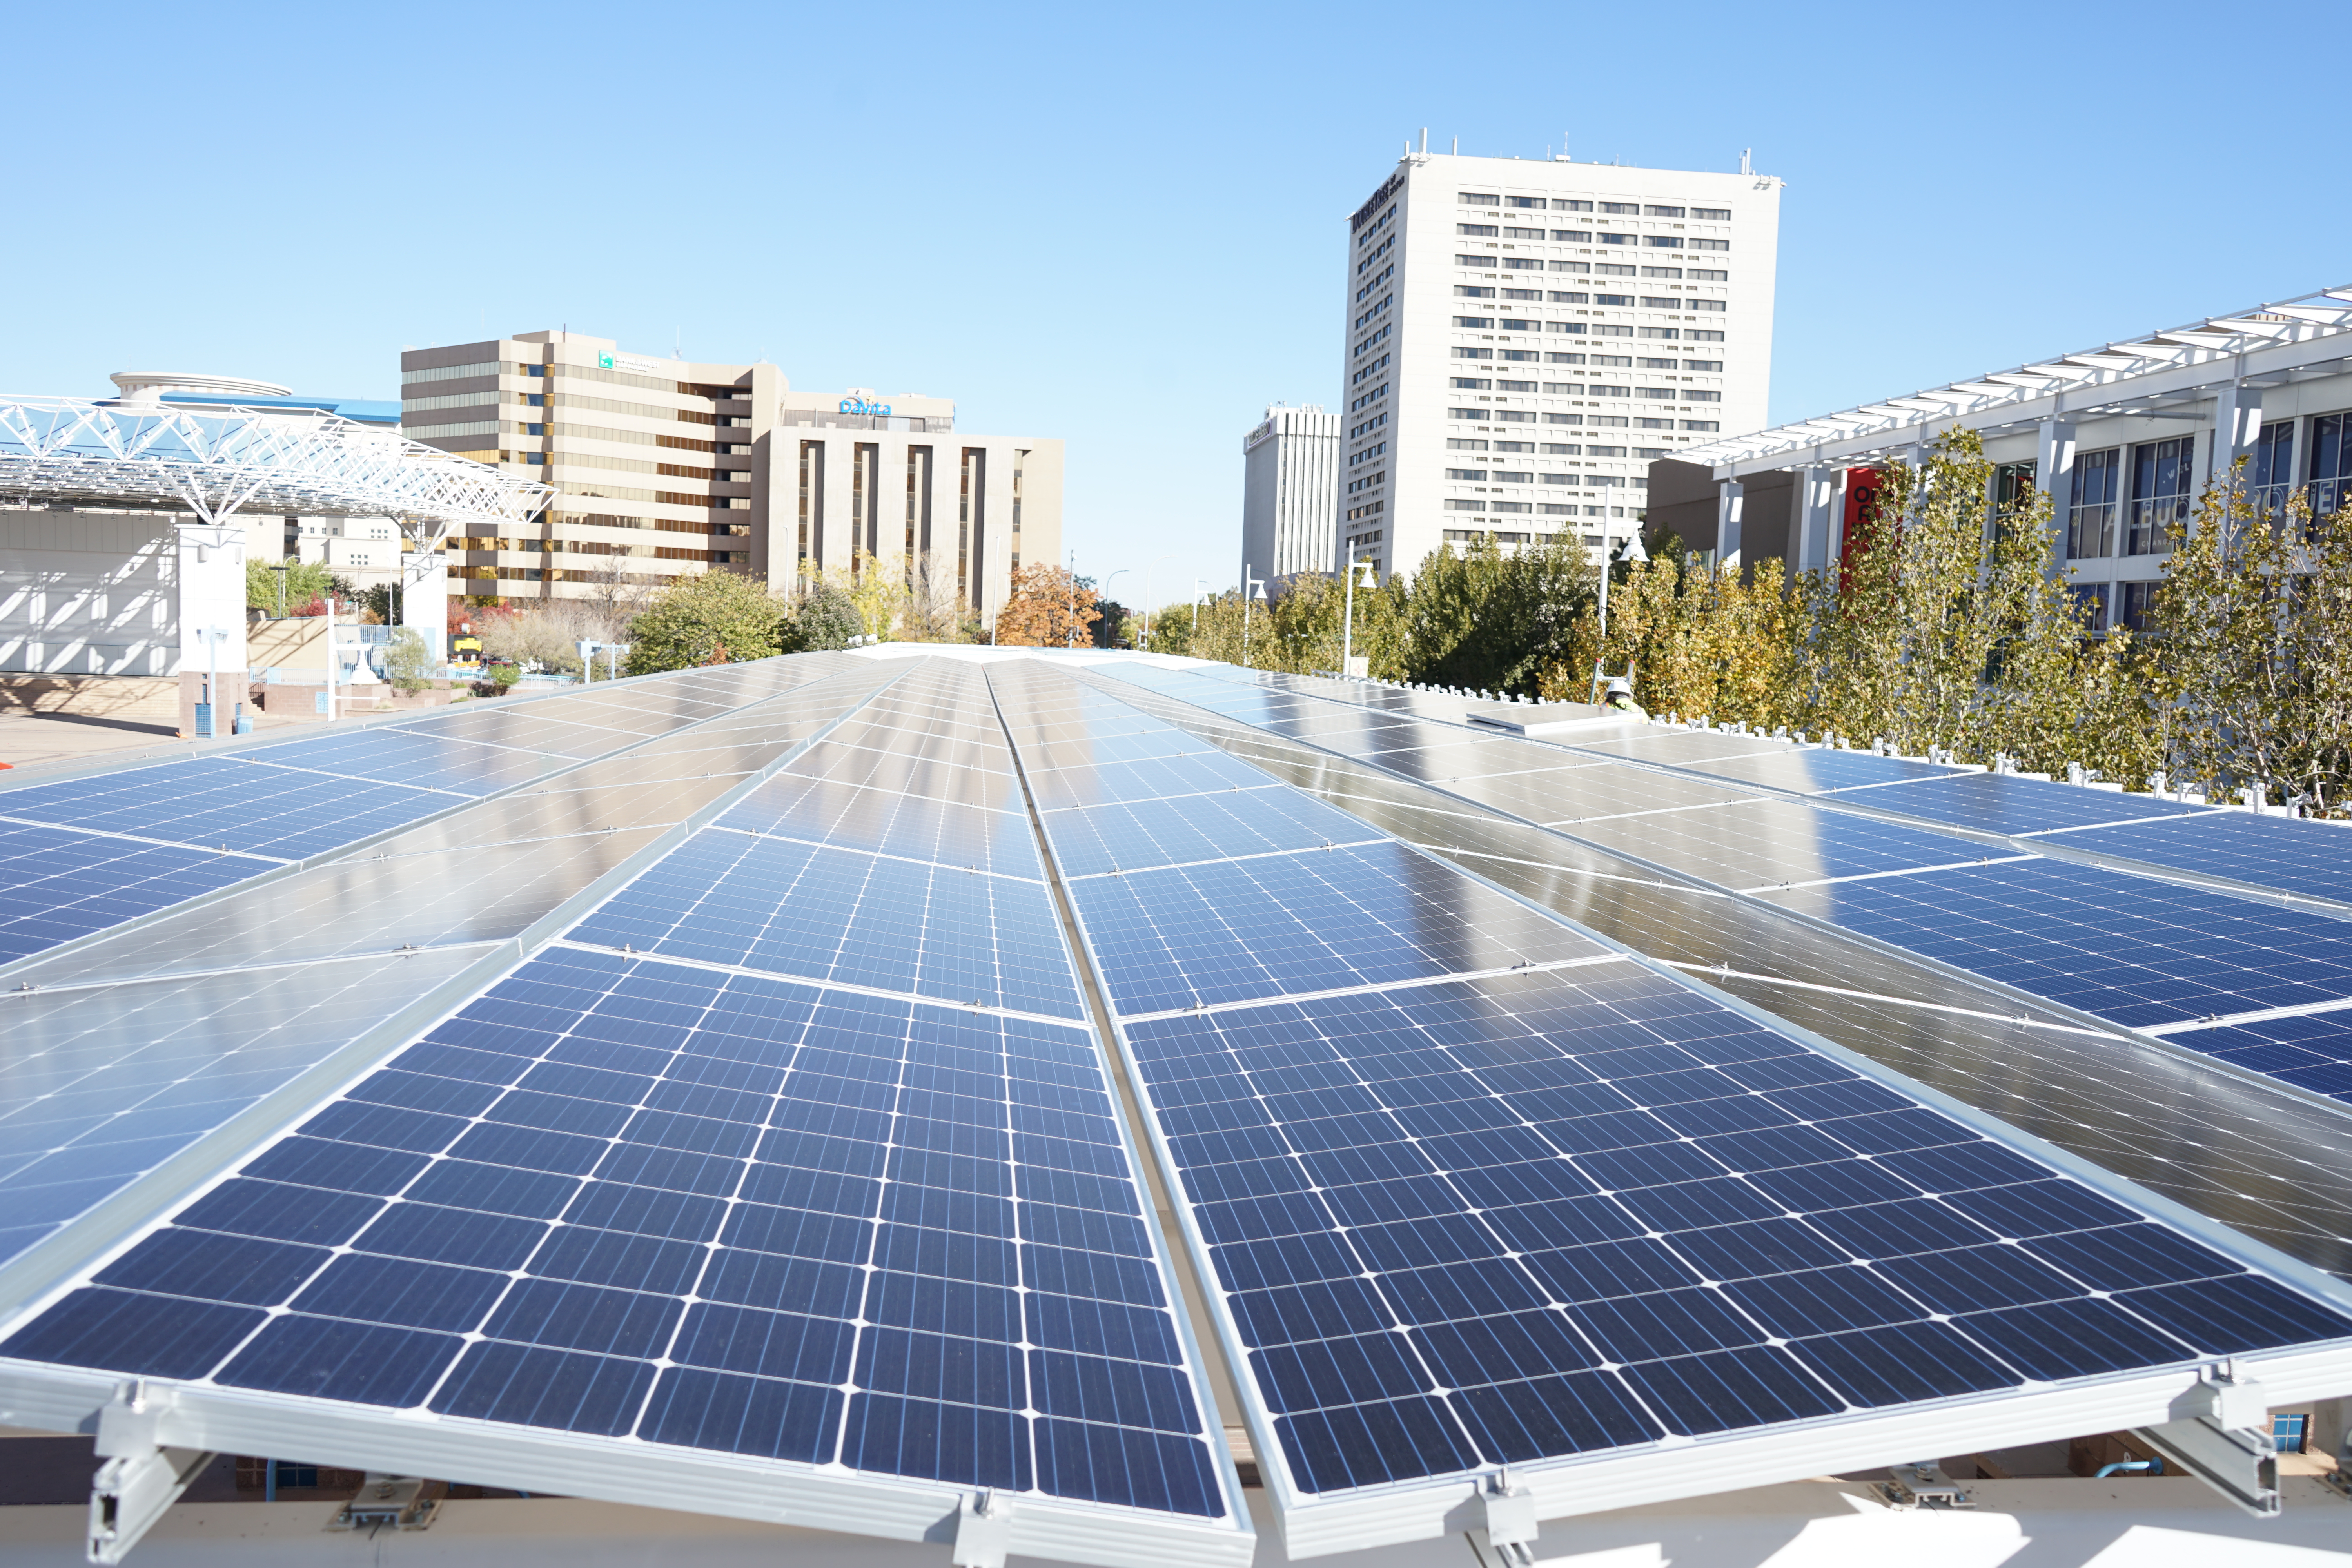 A picture of solar panels over civic plaza